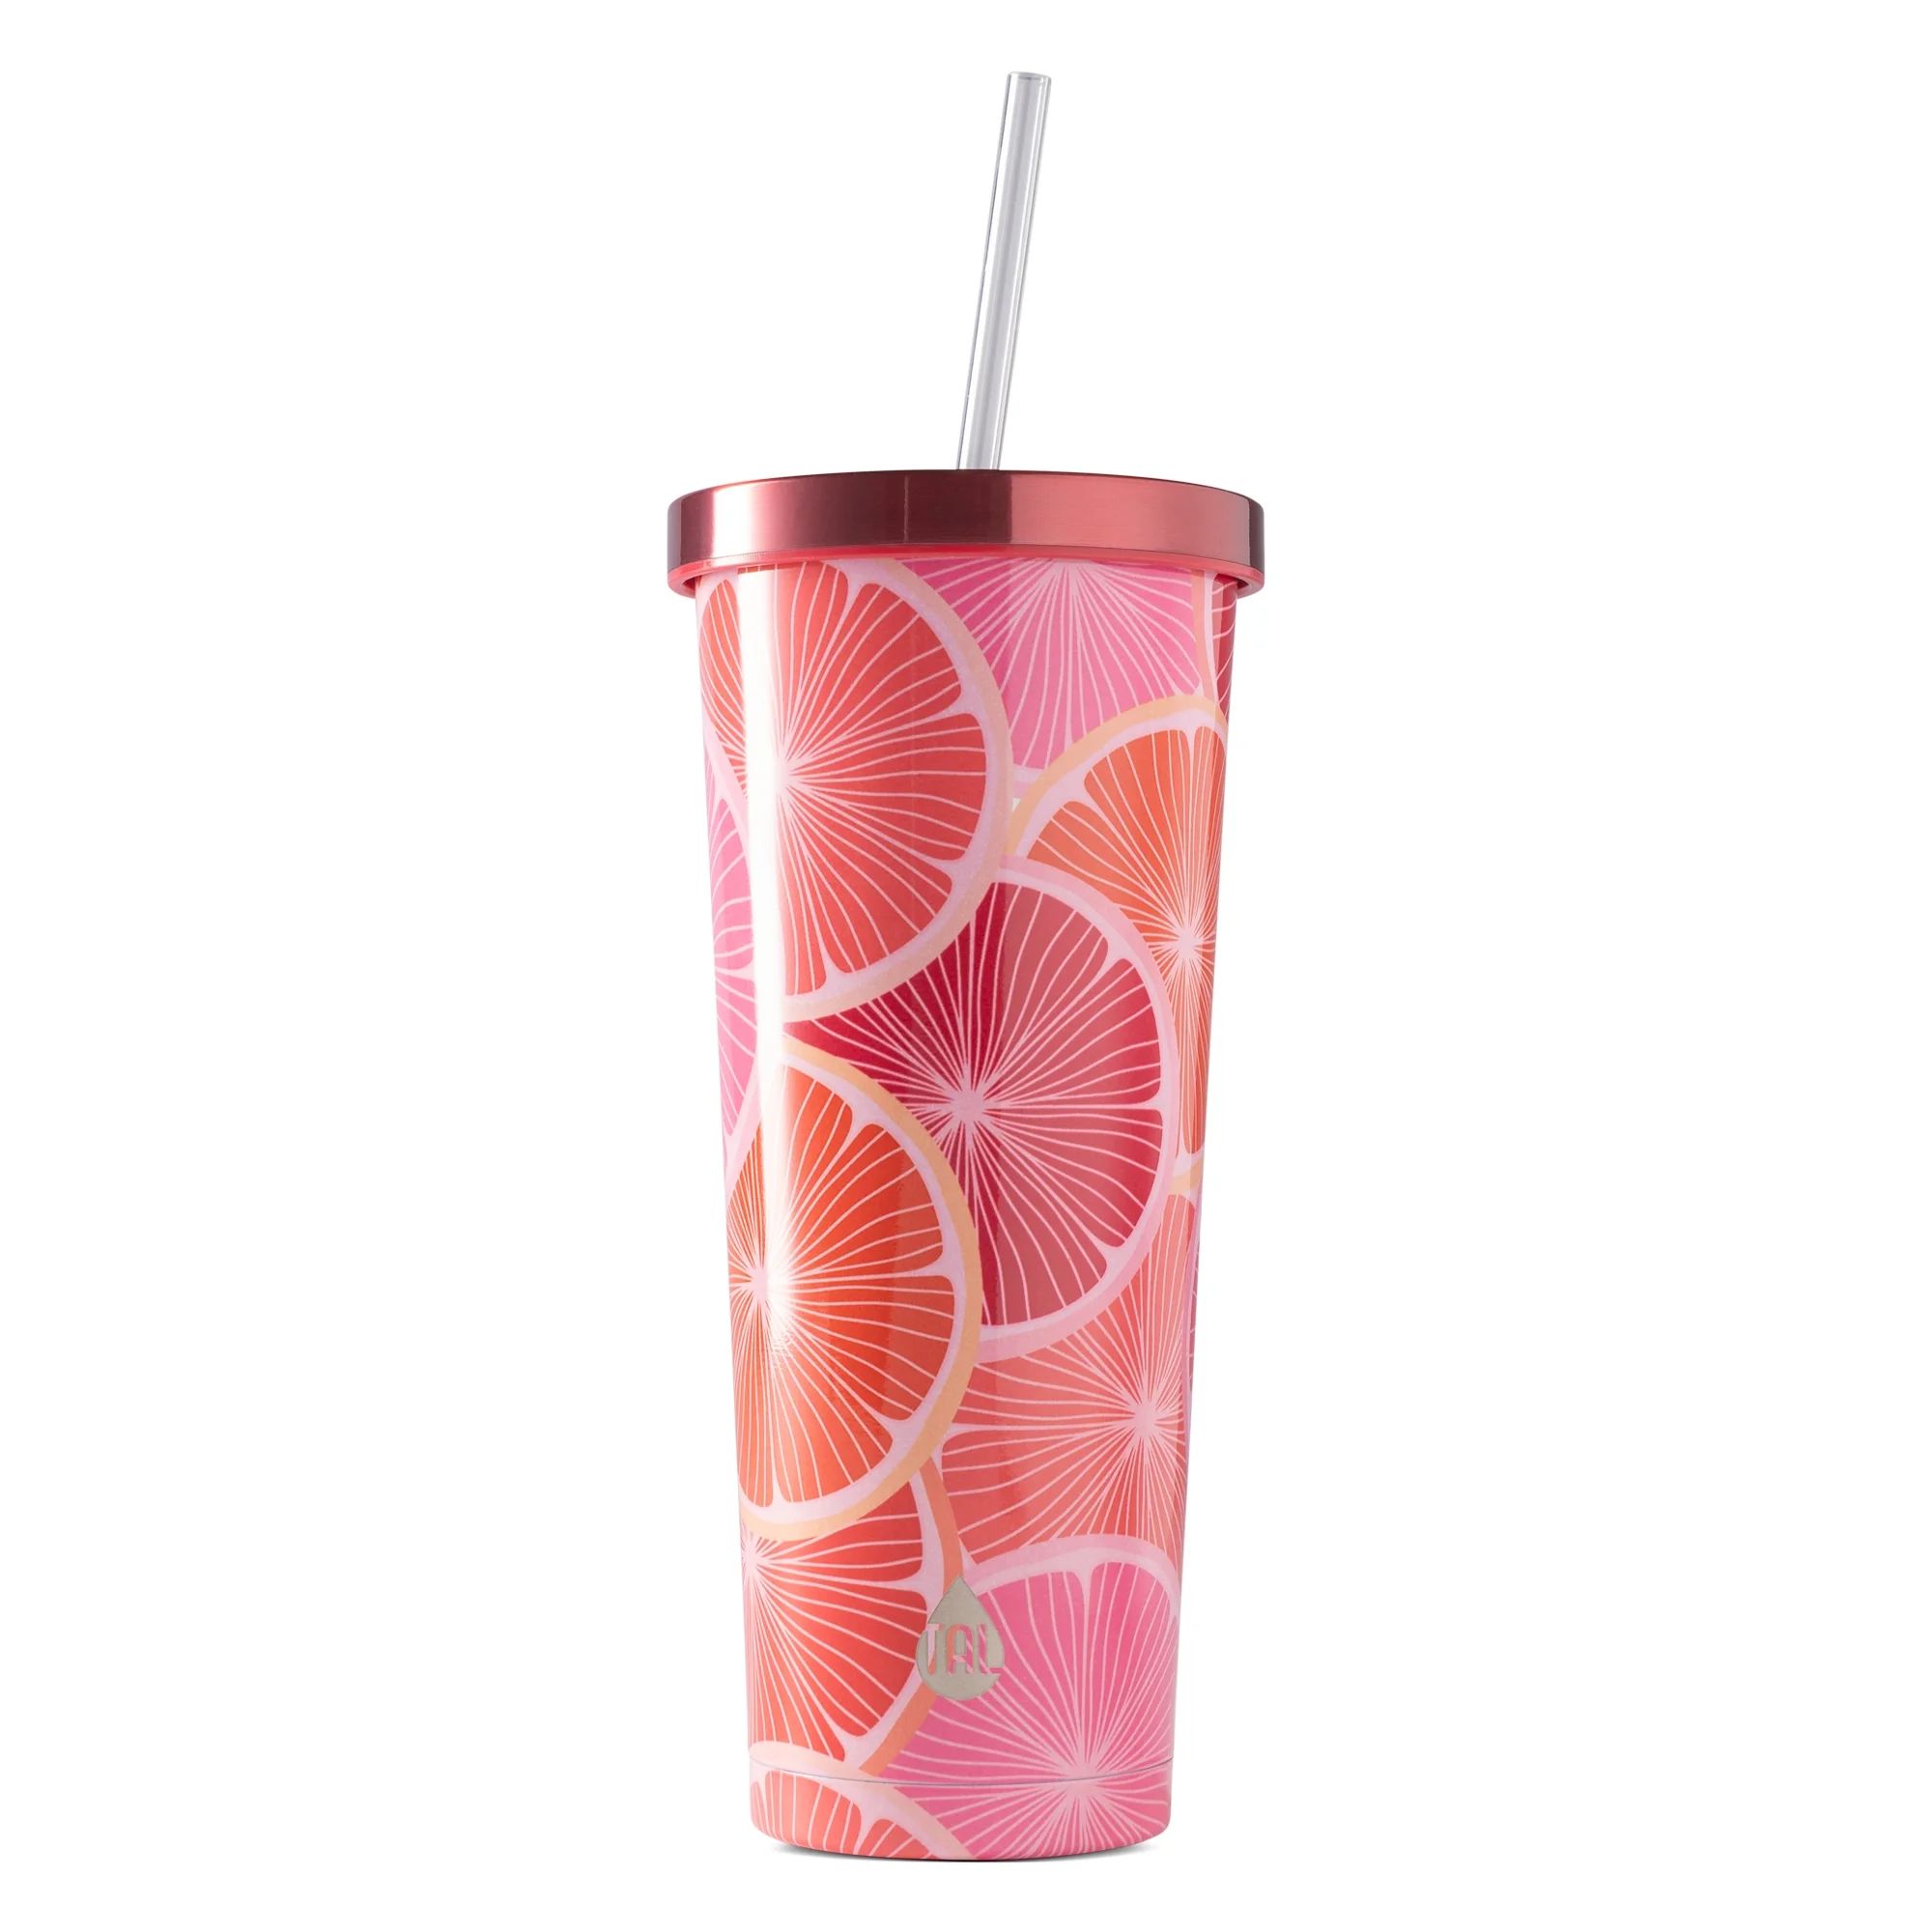 TAL Stainless Steel Ivy Tumbler with Straw 24oz, Grapefruit | Walmart (US)